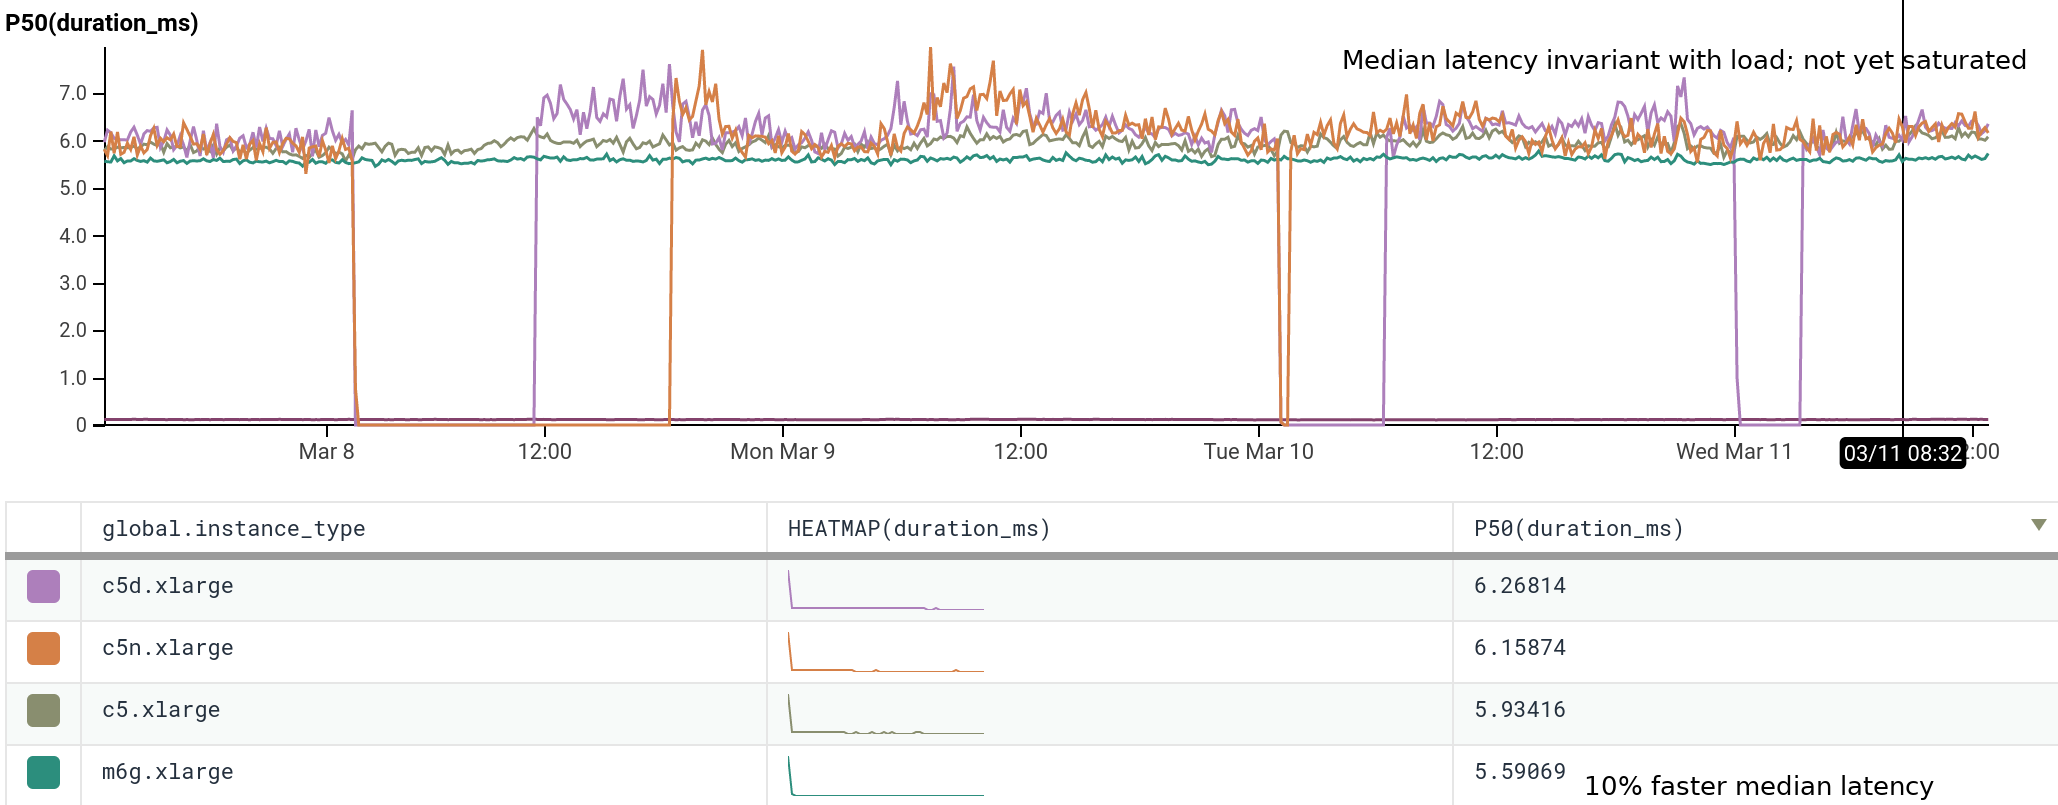 Median latency invariant with load; not yet saturated